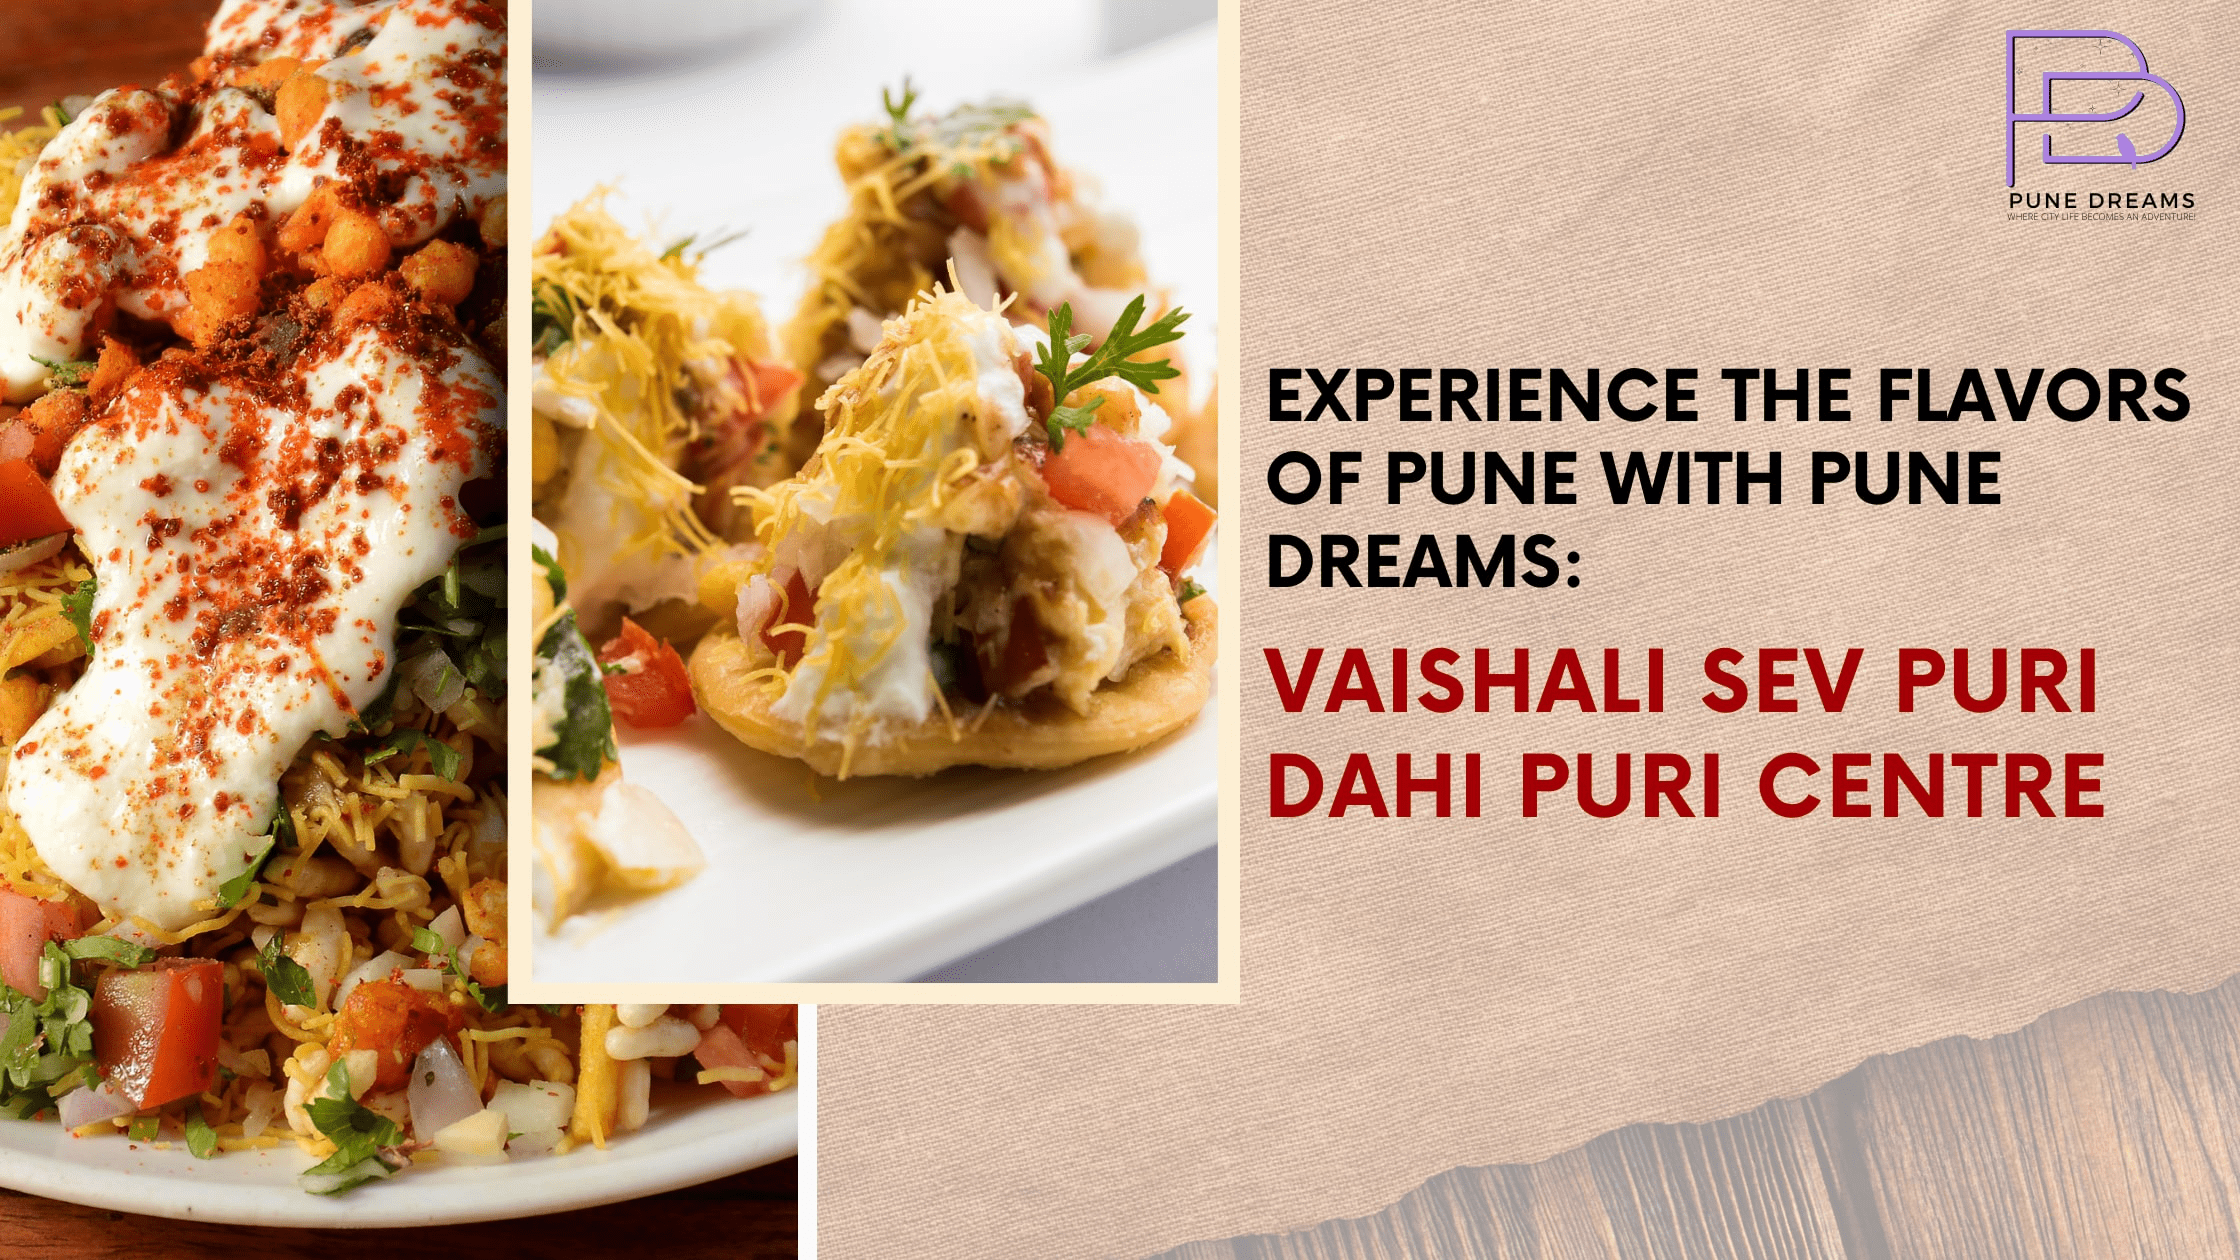 Experience the Flavors of Pune with Pune Dreams: Vaishali Sev Puri Dahi Puri  Centre